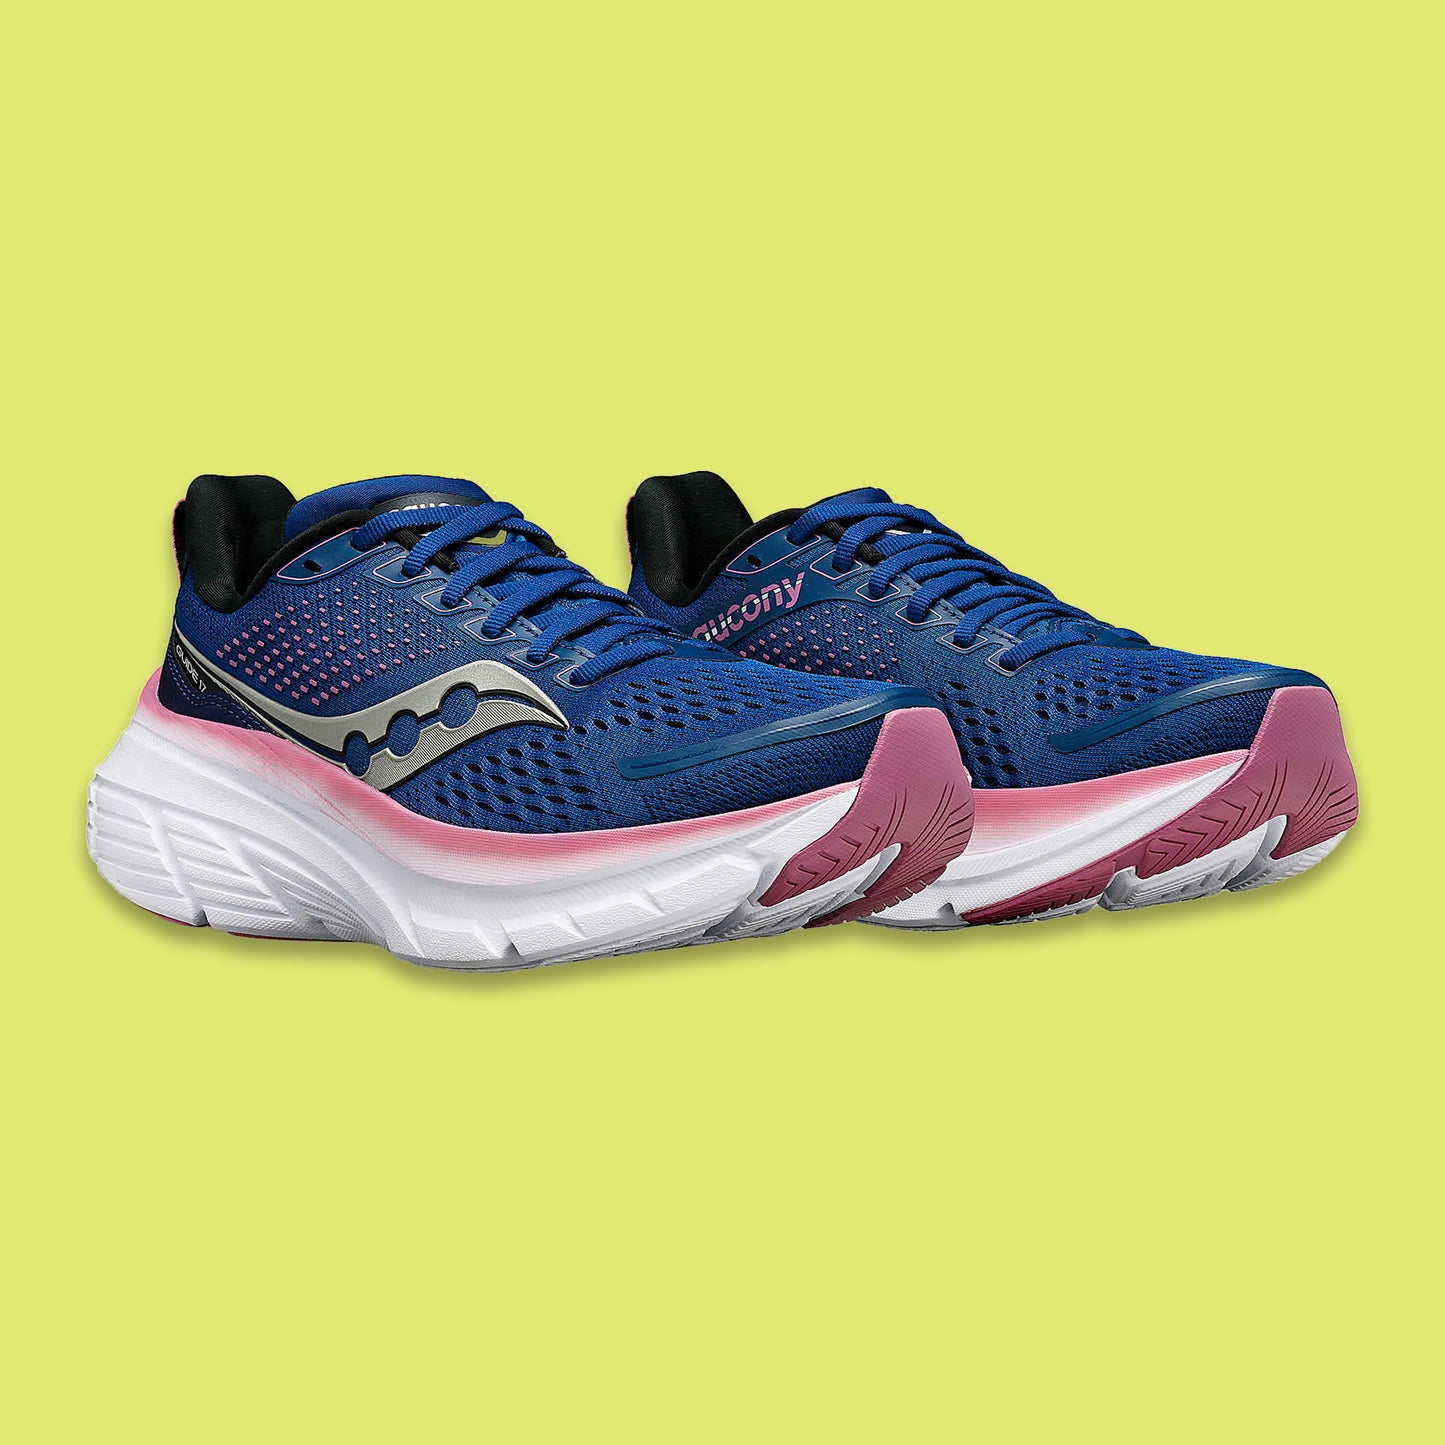 Women's Guide 17 - Stability Running Shoes